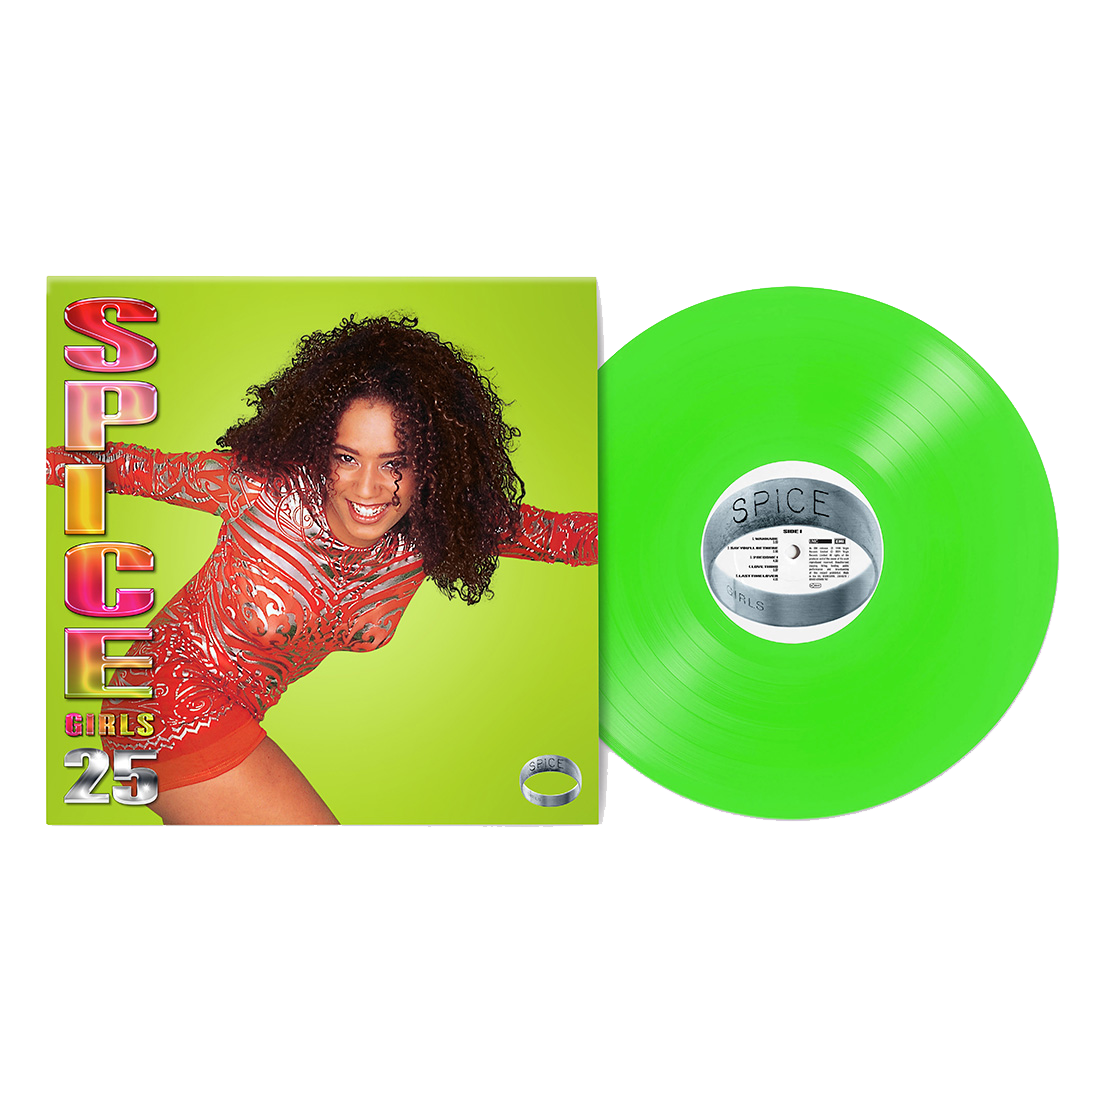 Spice Girls - Spice - 25th Anniversary: (‘Scary’ Light Green Coloured) Vinyl LP